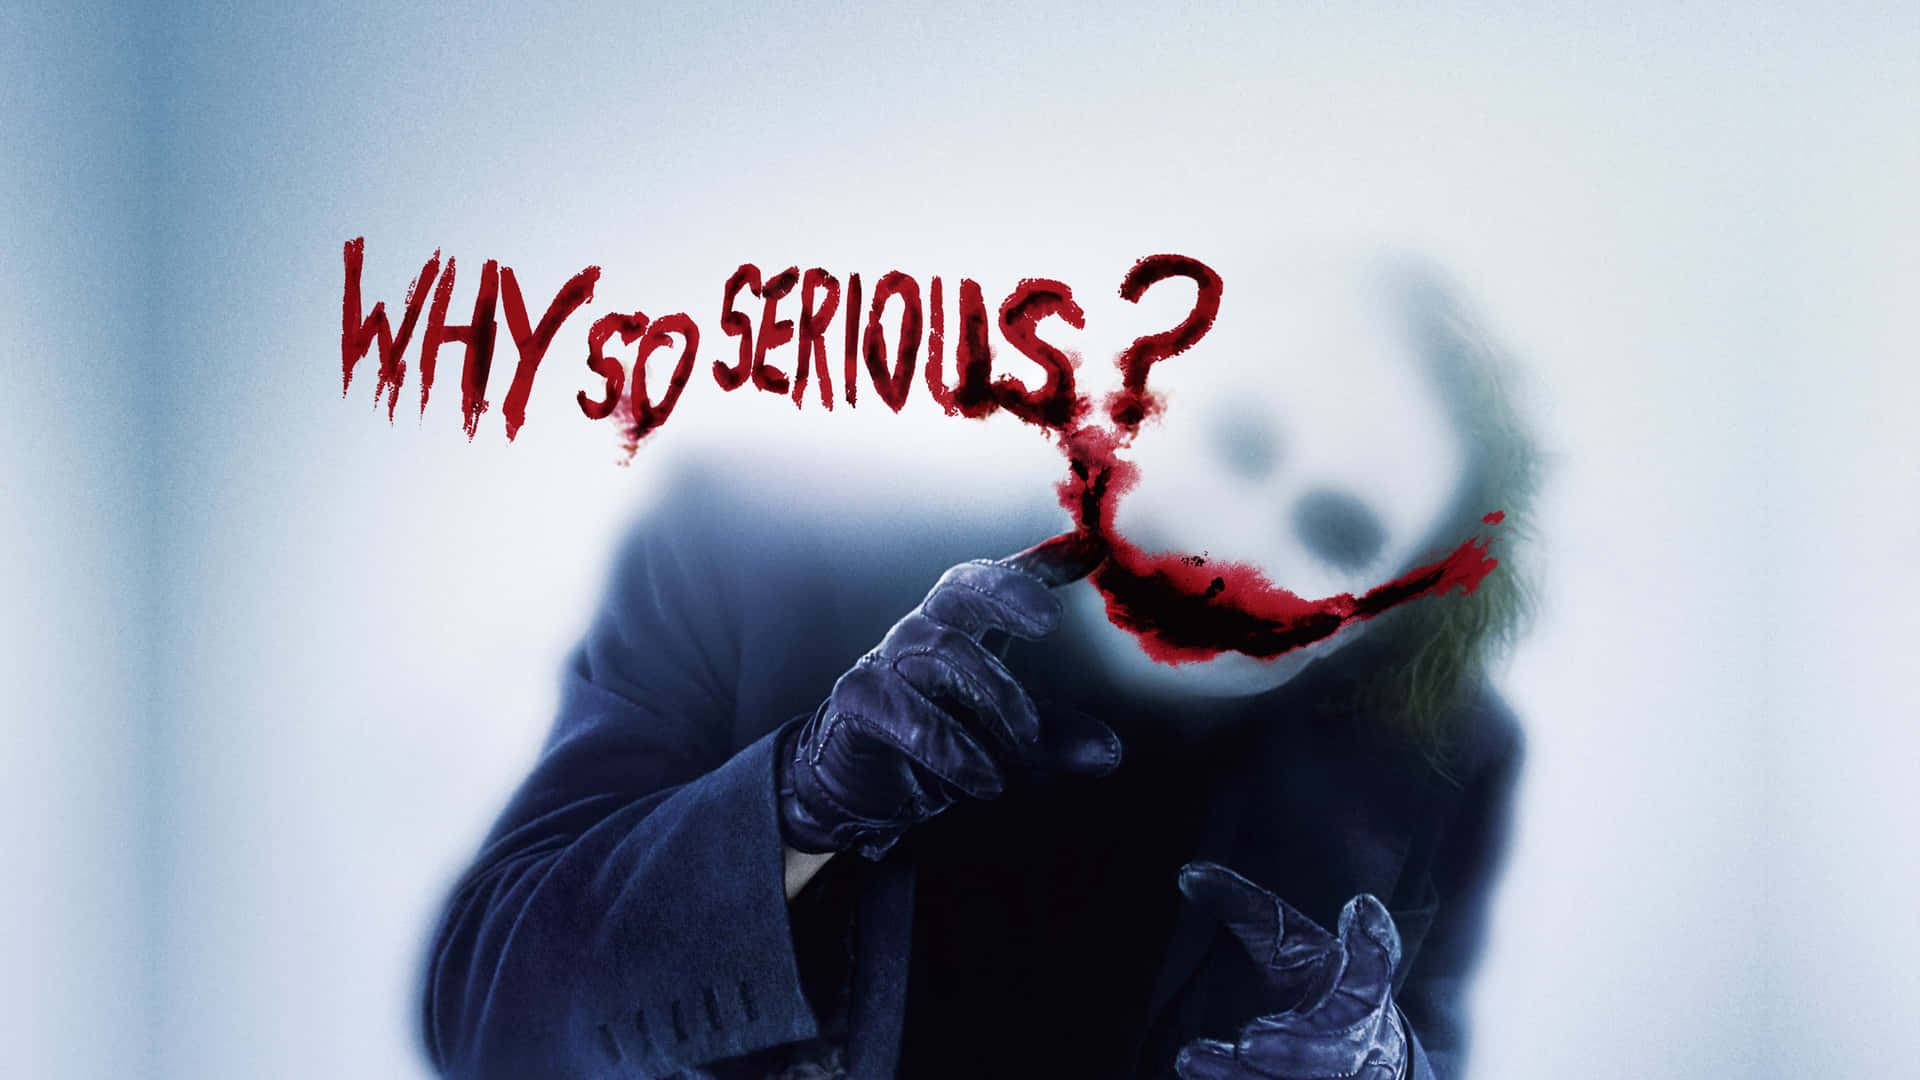 Caption: The Dark Knight's Joker in 4K Ultra HD Displaying his Iconic Catchphrase Wallpaper